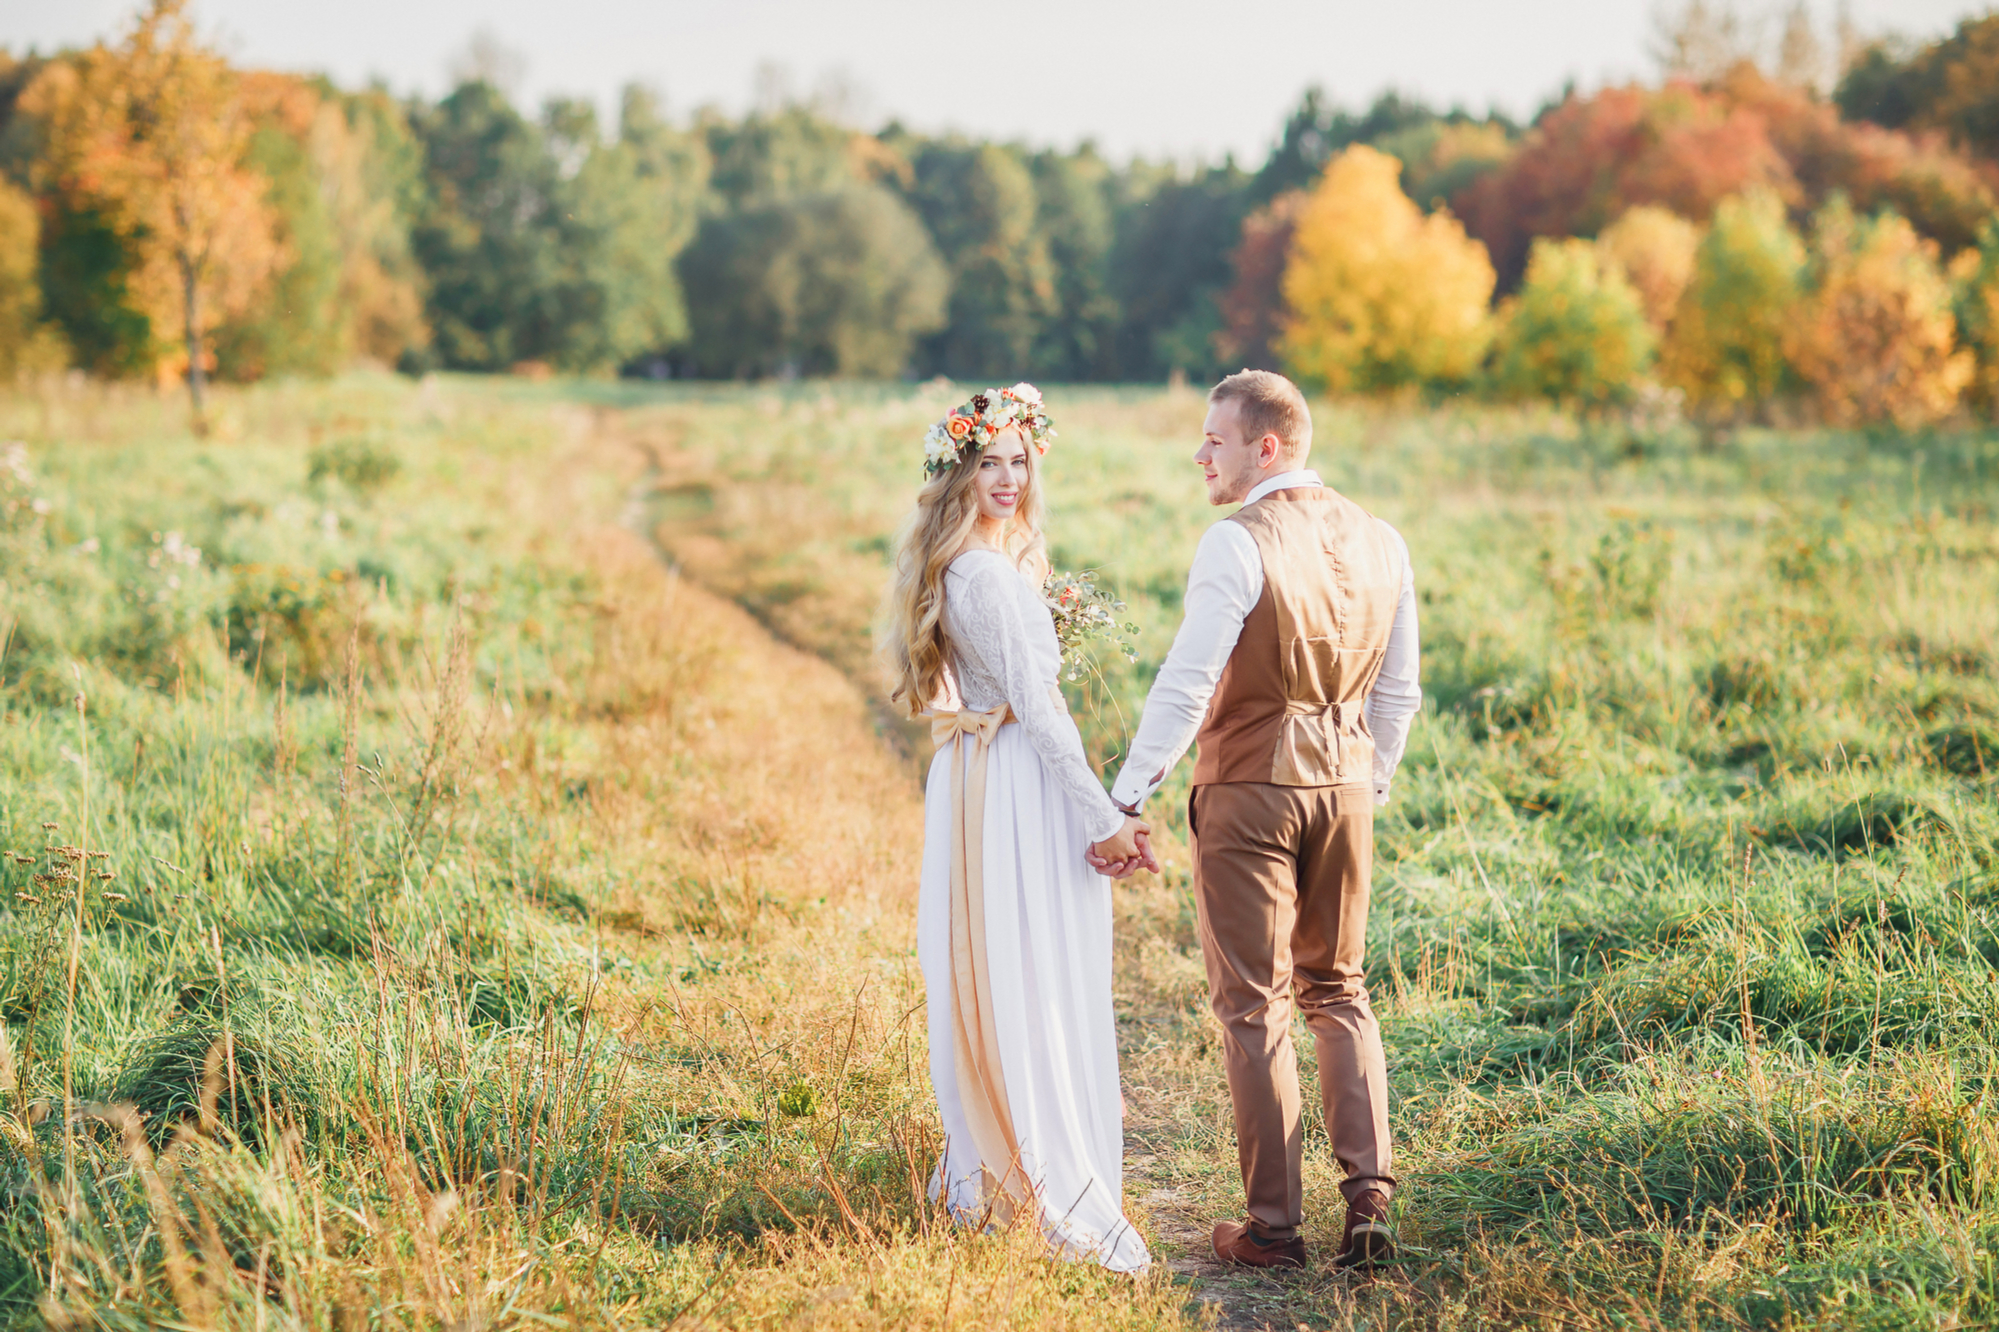 fall weddings | fall | wedding | why fall weddings are so popular | getting married in the fall | seasonal planning | seasonal wedding planning 